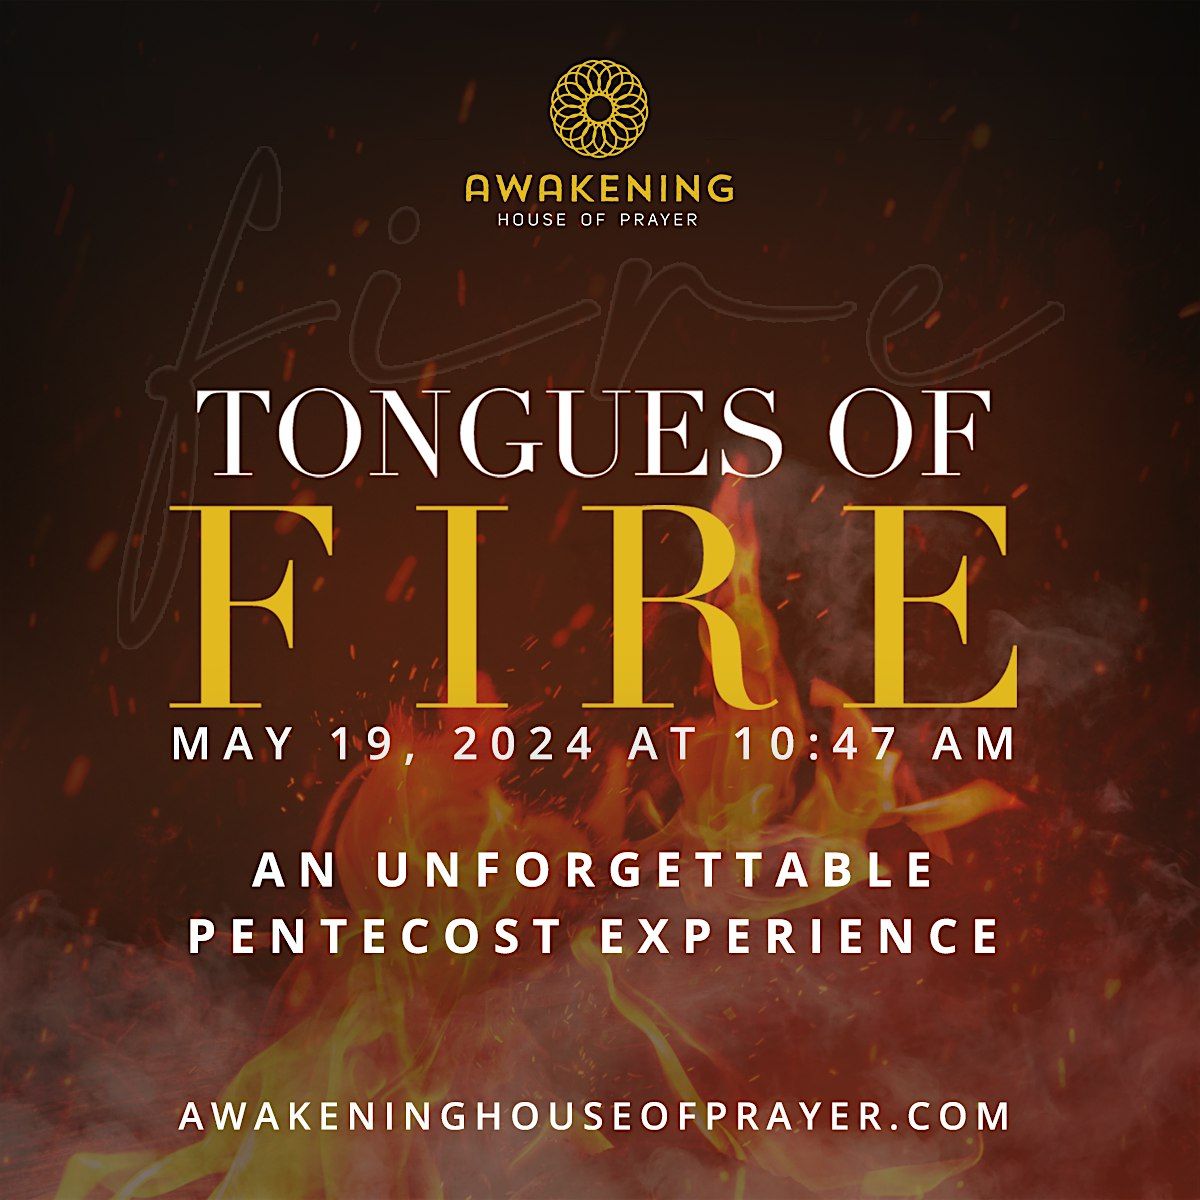 Tongues of Fire: An Unforgettable Pentecost Experience